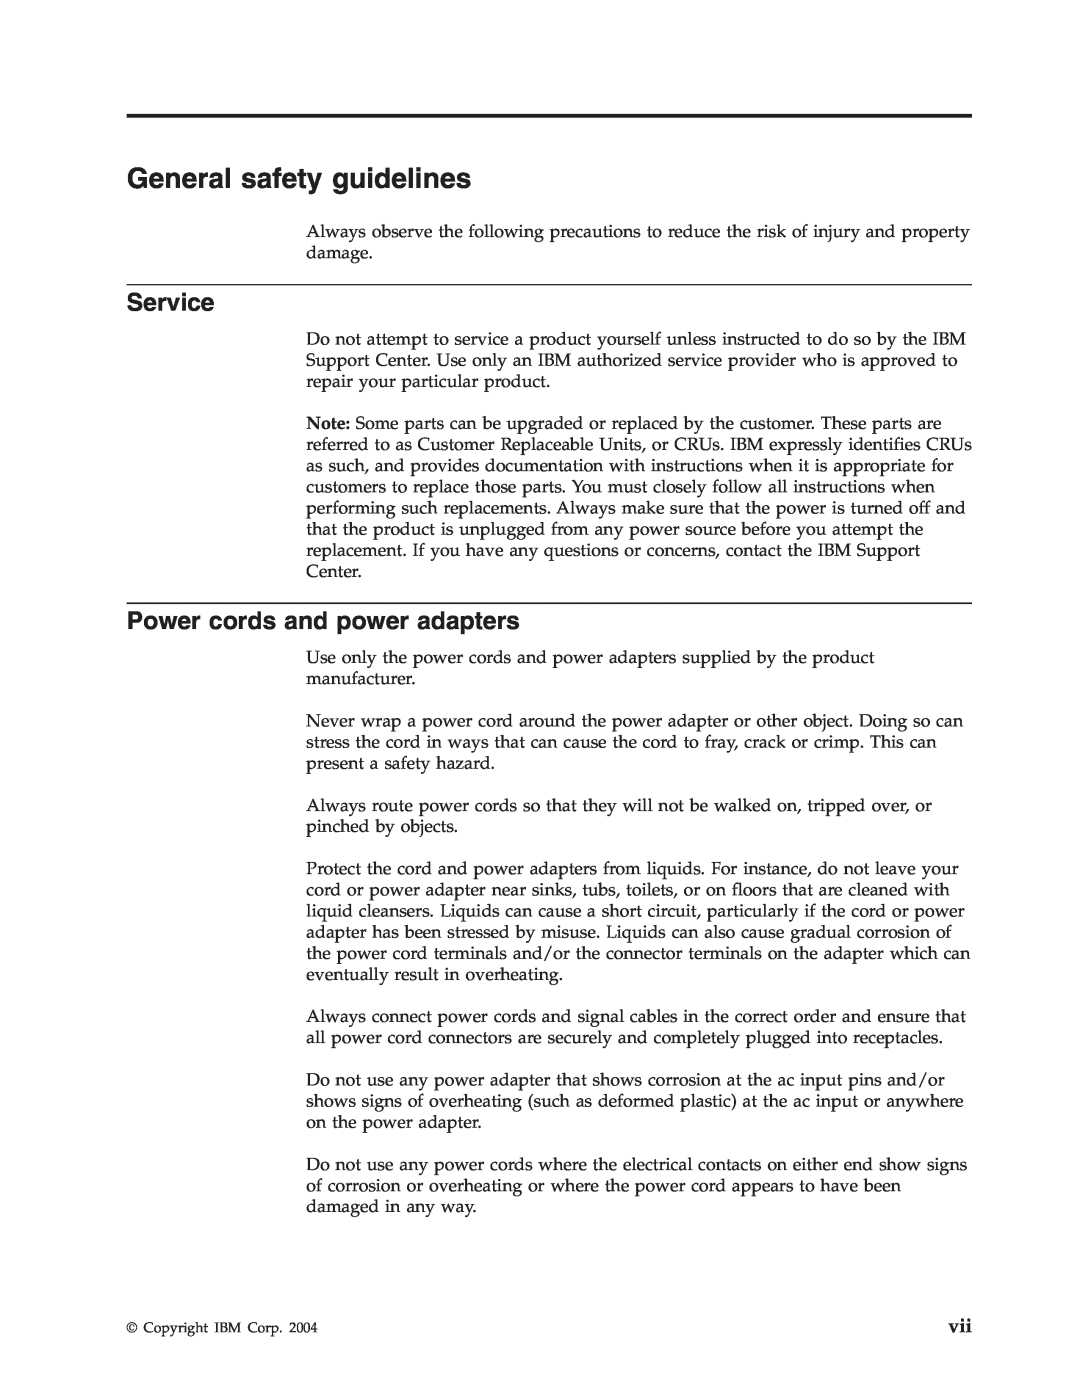 IBM PROJECTOR C400 manual General safety guidelines, Service, Power cords and power adapters 